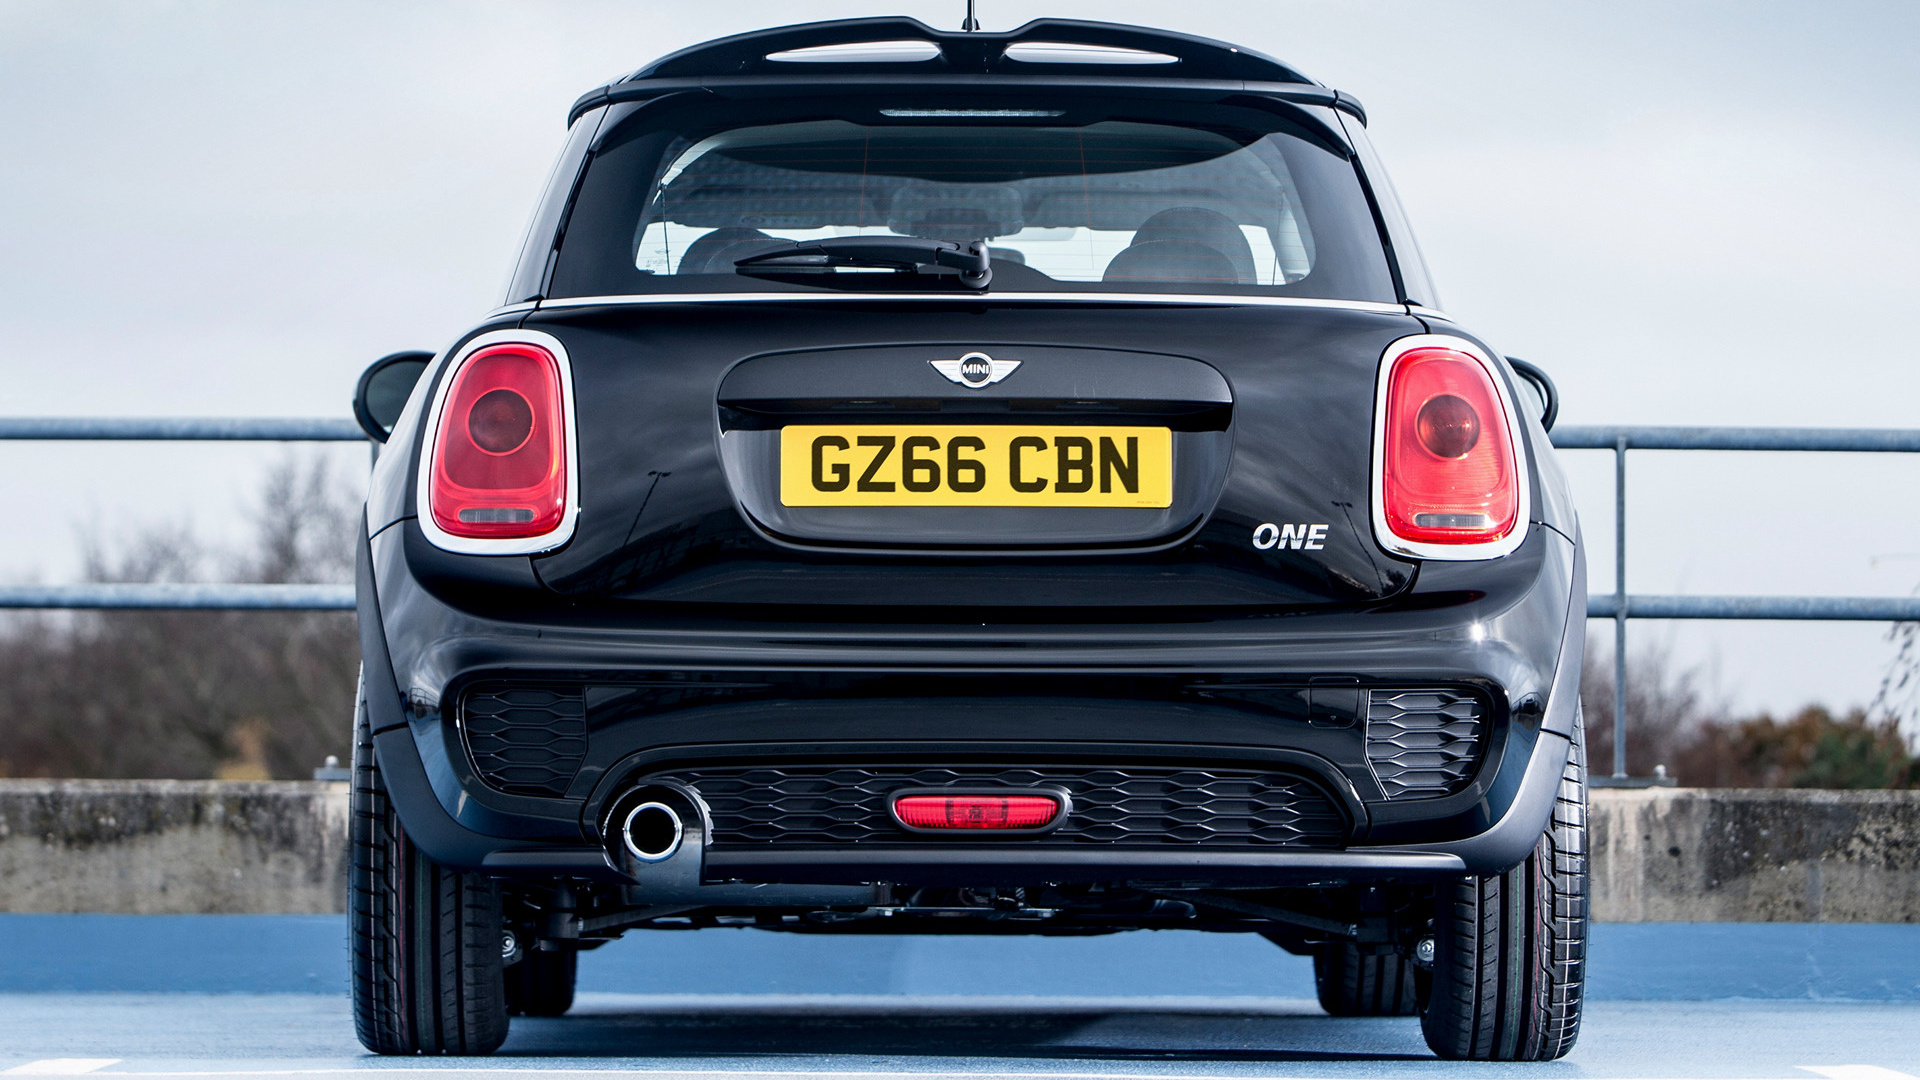 2015 Mini One JCW Package 3-door (UK) - Wallpapers and HD Images | Car ...